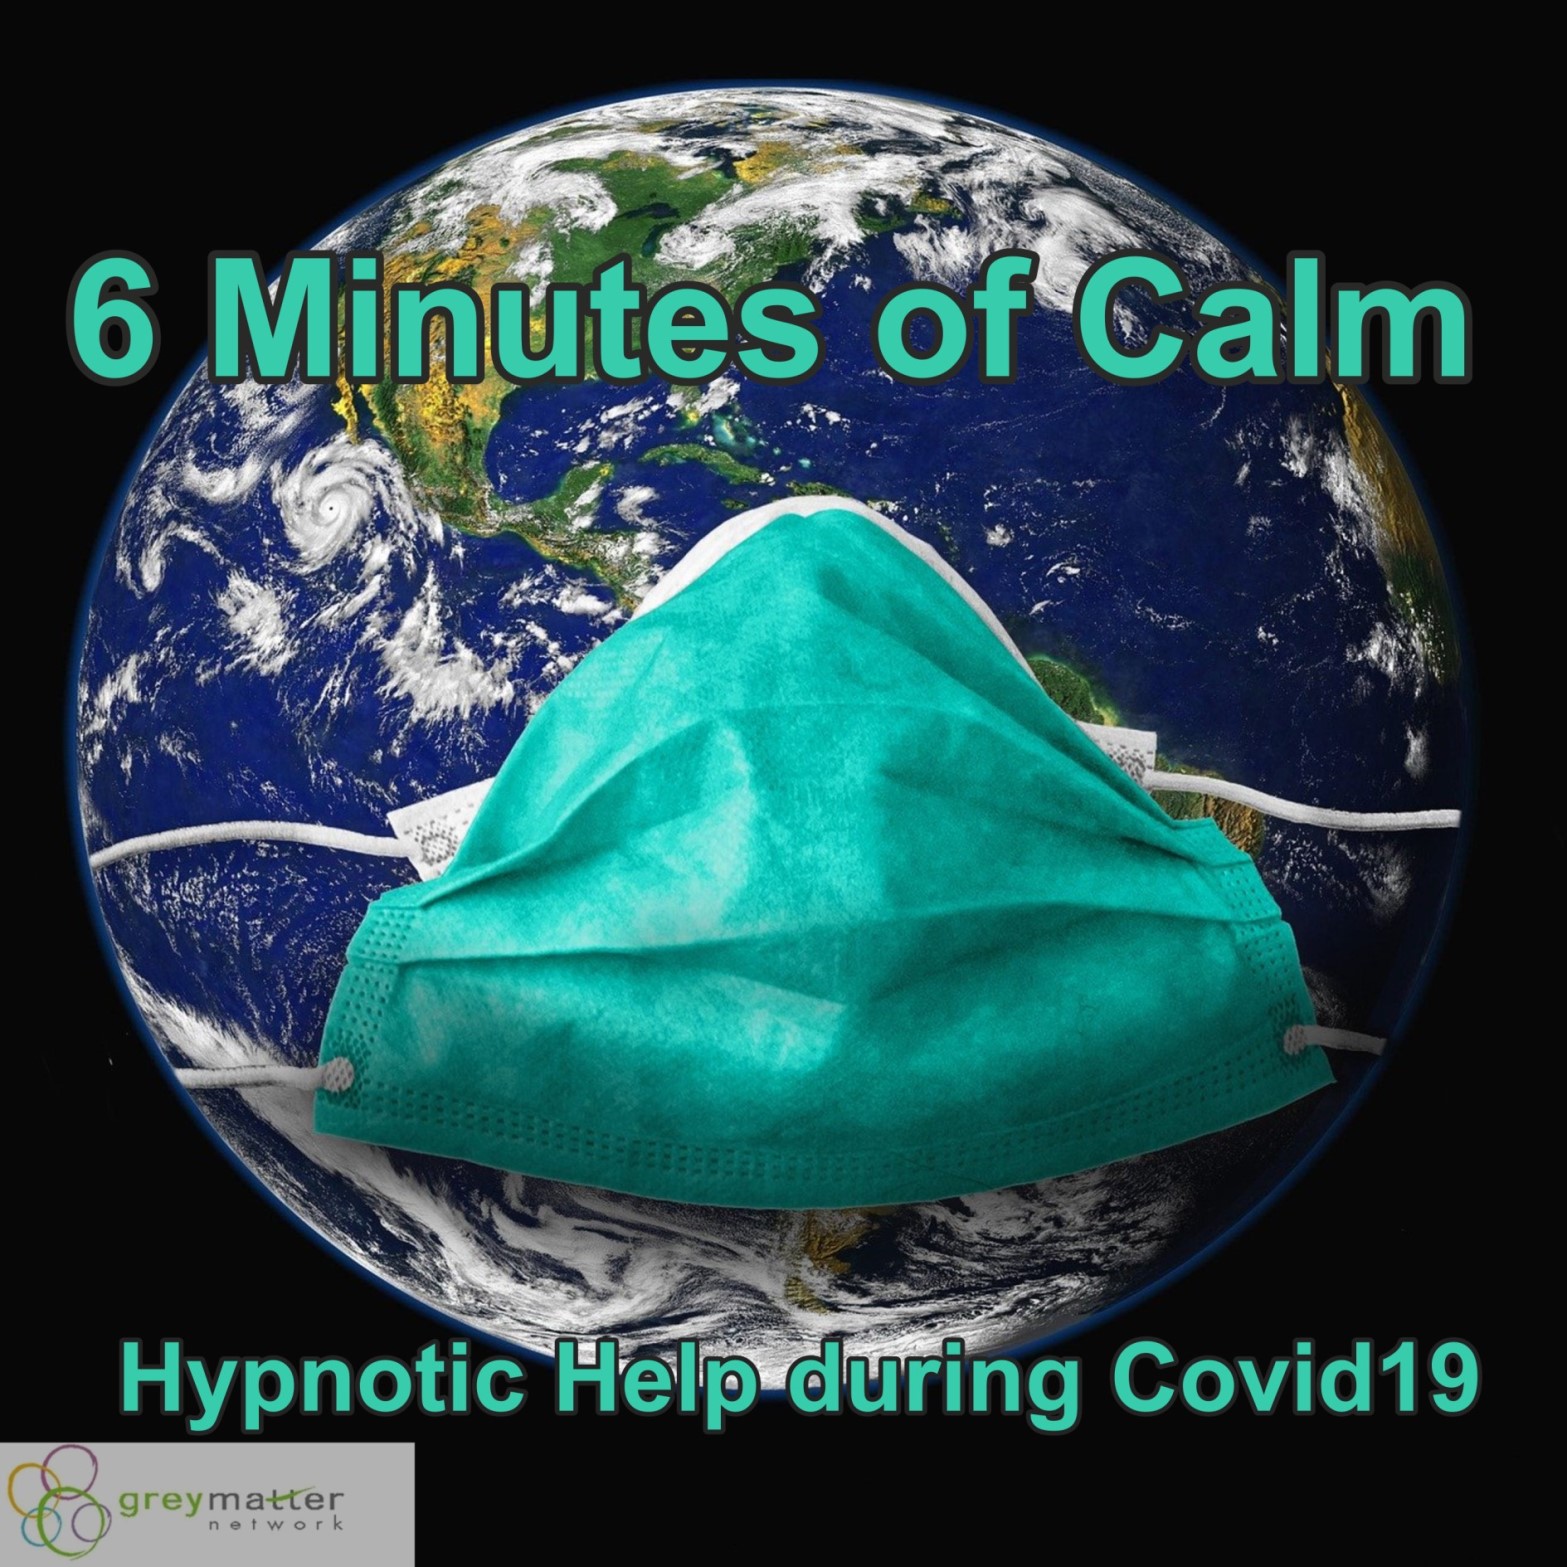 Artwork for podcast Six Minutes of Calm during Coronavirus Outbreak